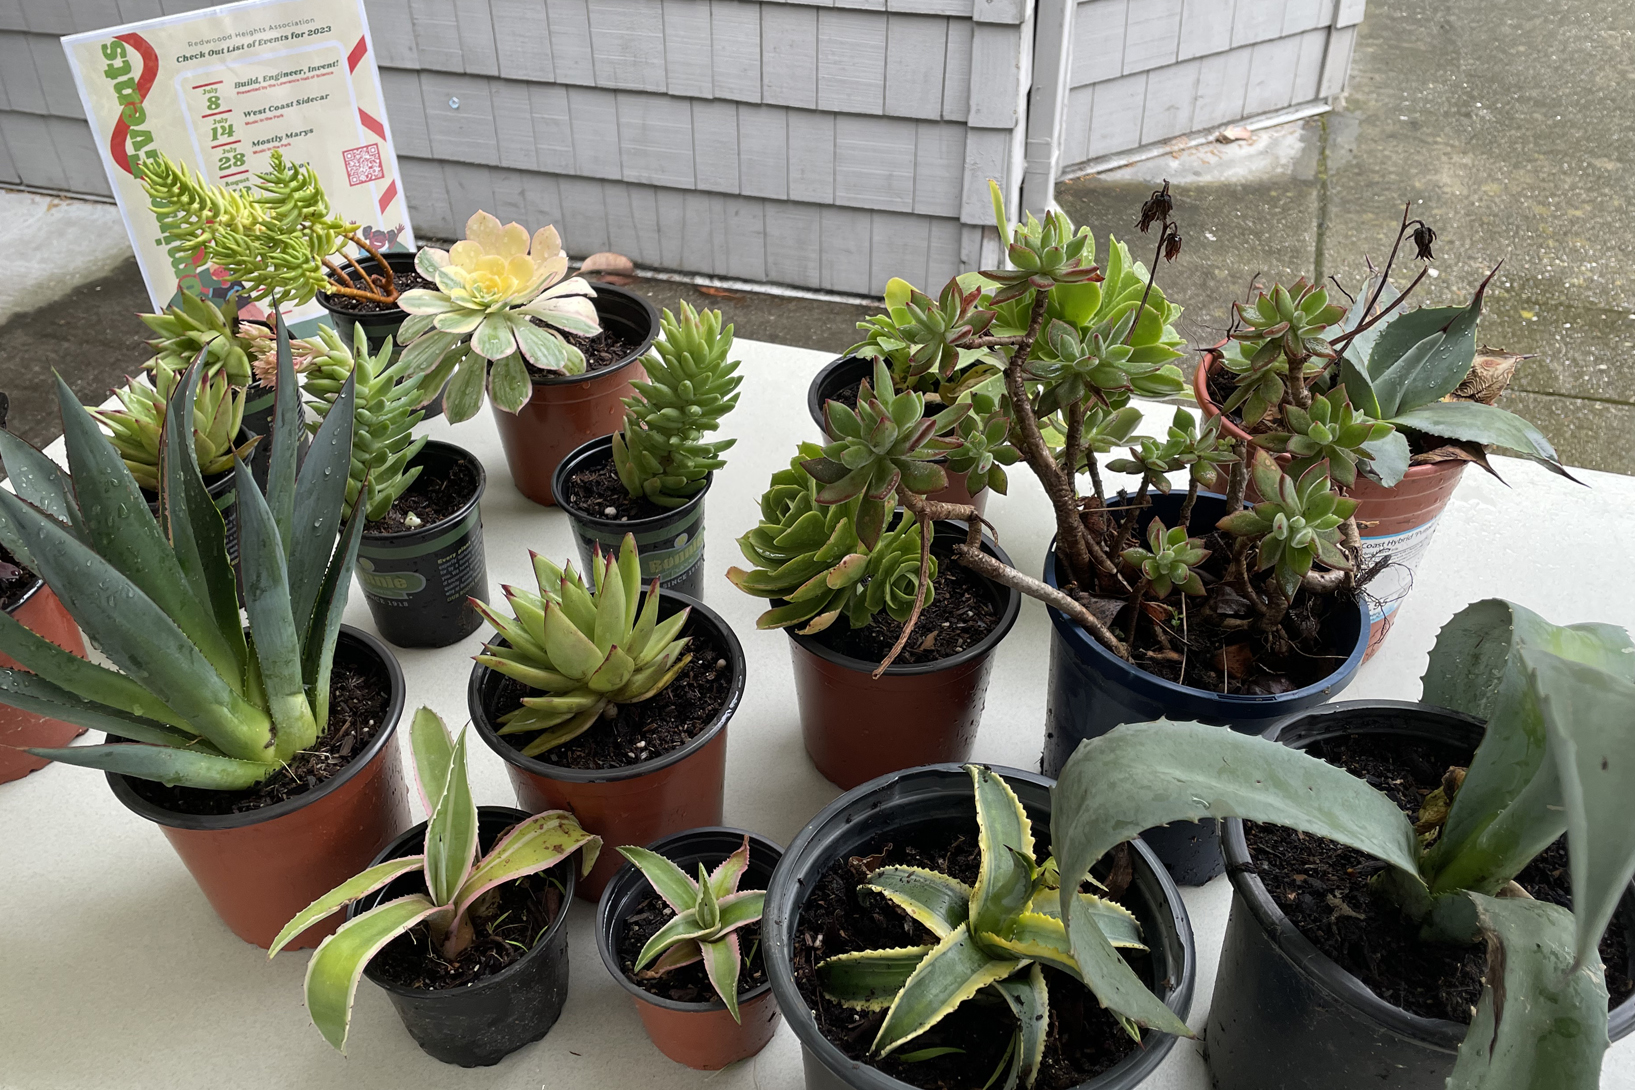 RHA Events: Sample of plants at the RHA Plant Share event